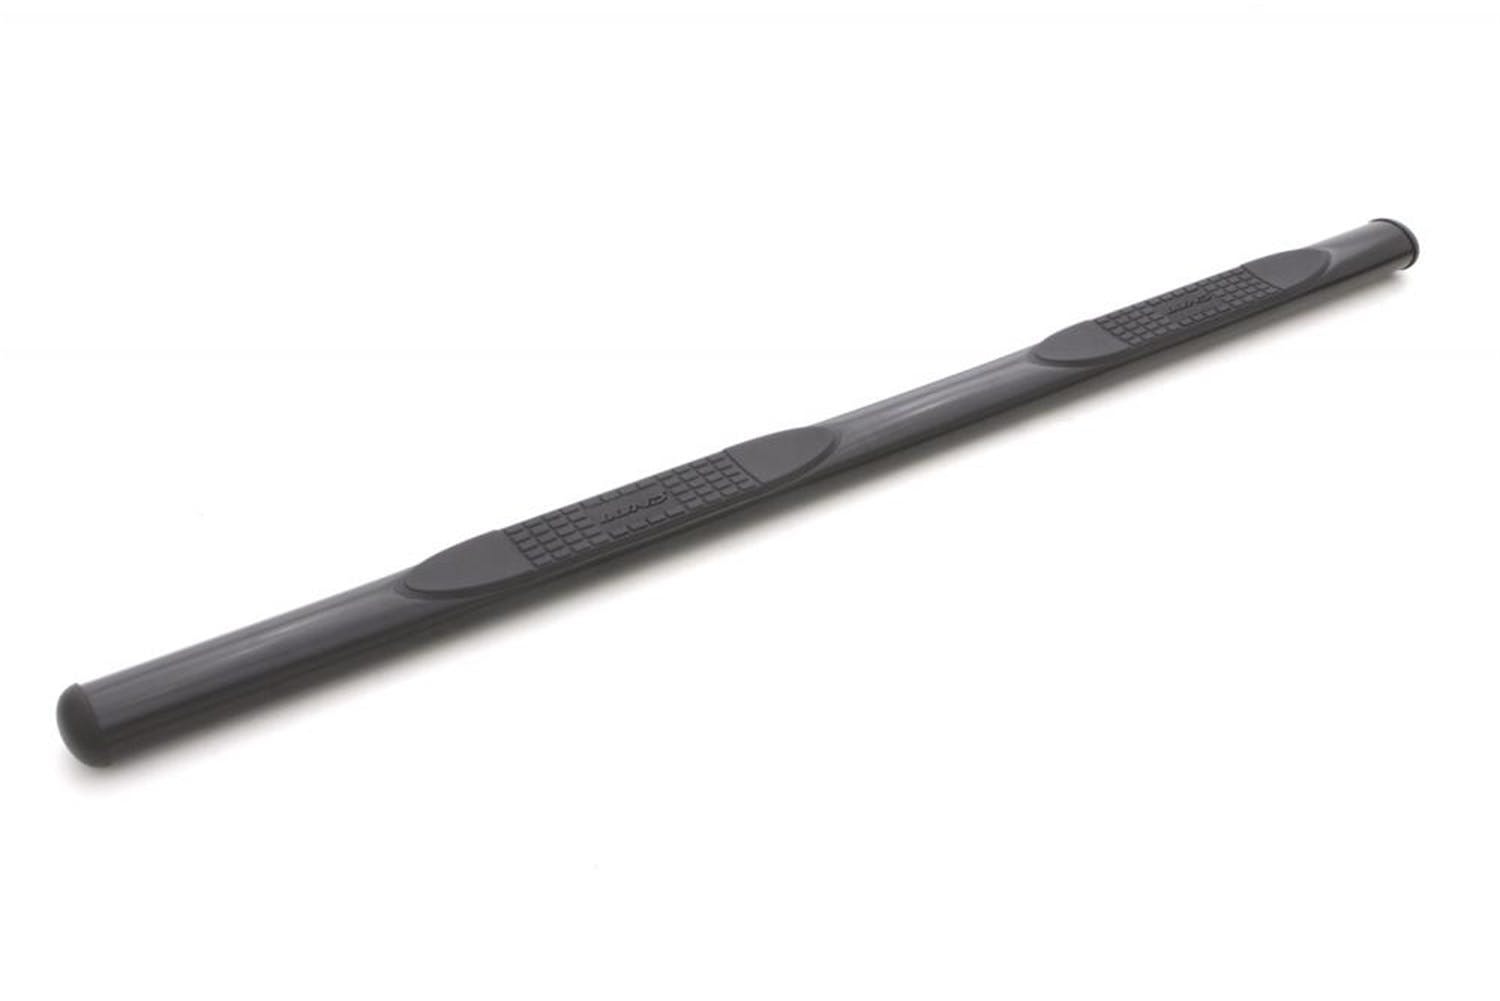 LUND 23676784 4 Inch Oval Straight Nerf Bar - Black 4 In OVAL STRAIGHT STEEL